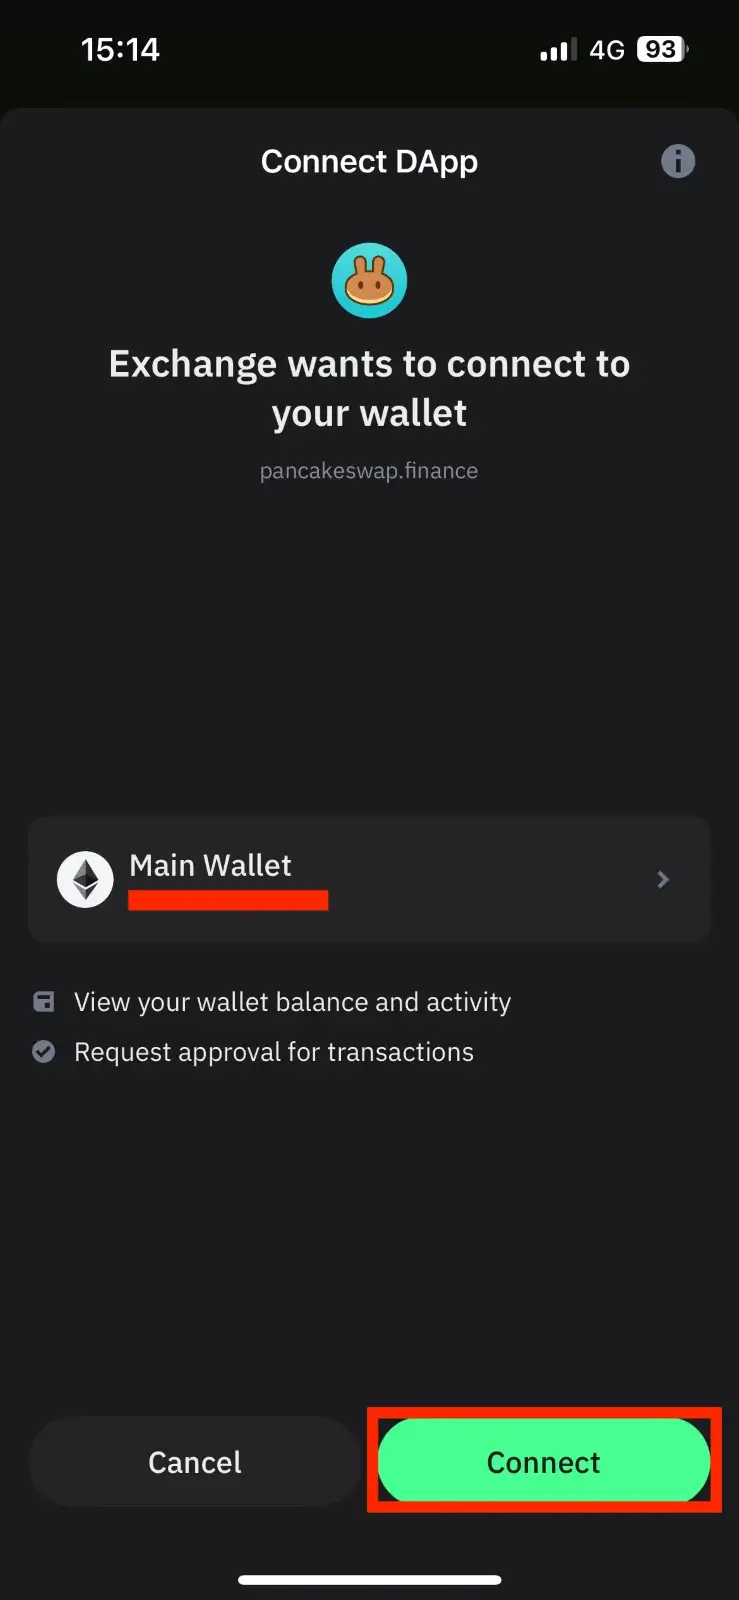 Step 3: Select the Main Wallet and Click on Connect